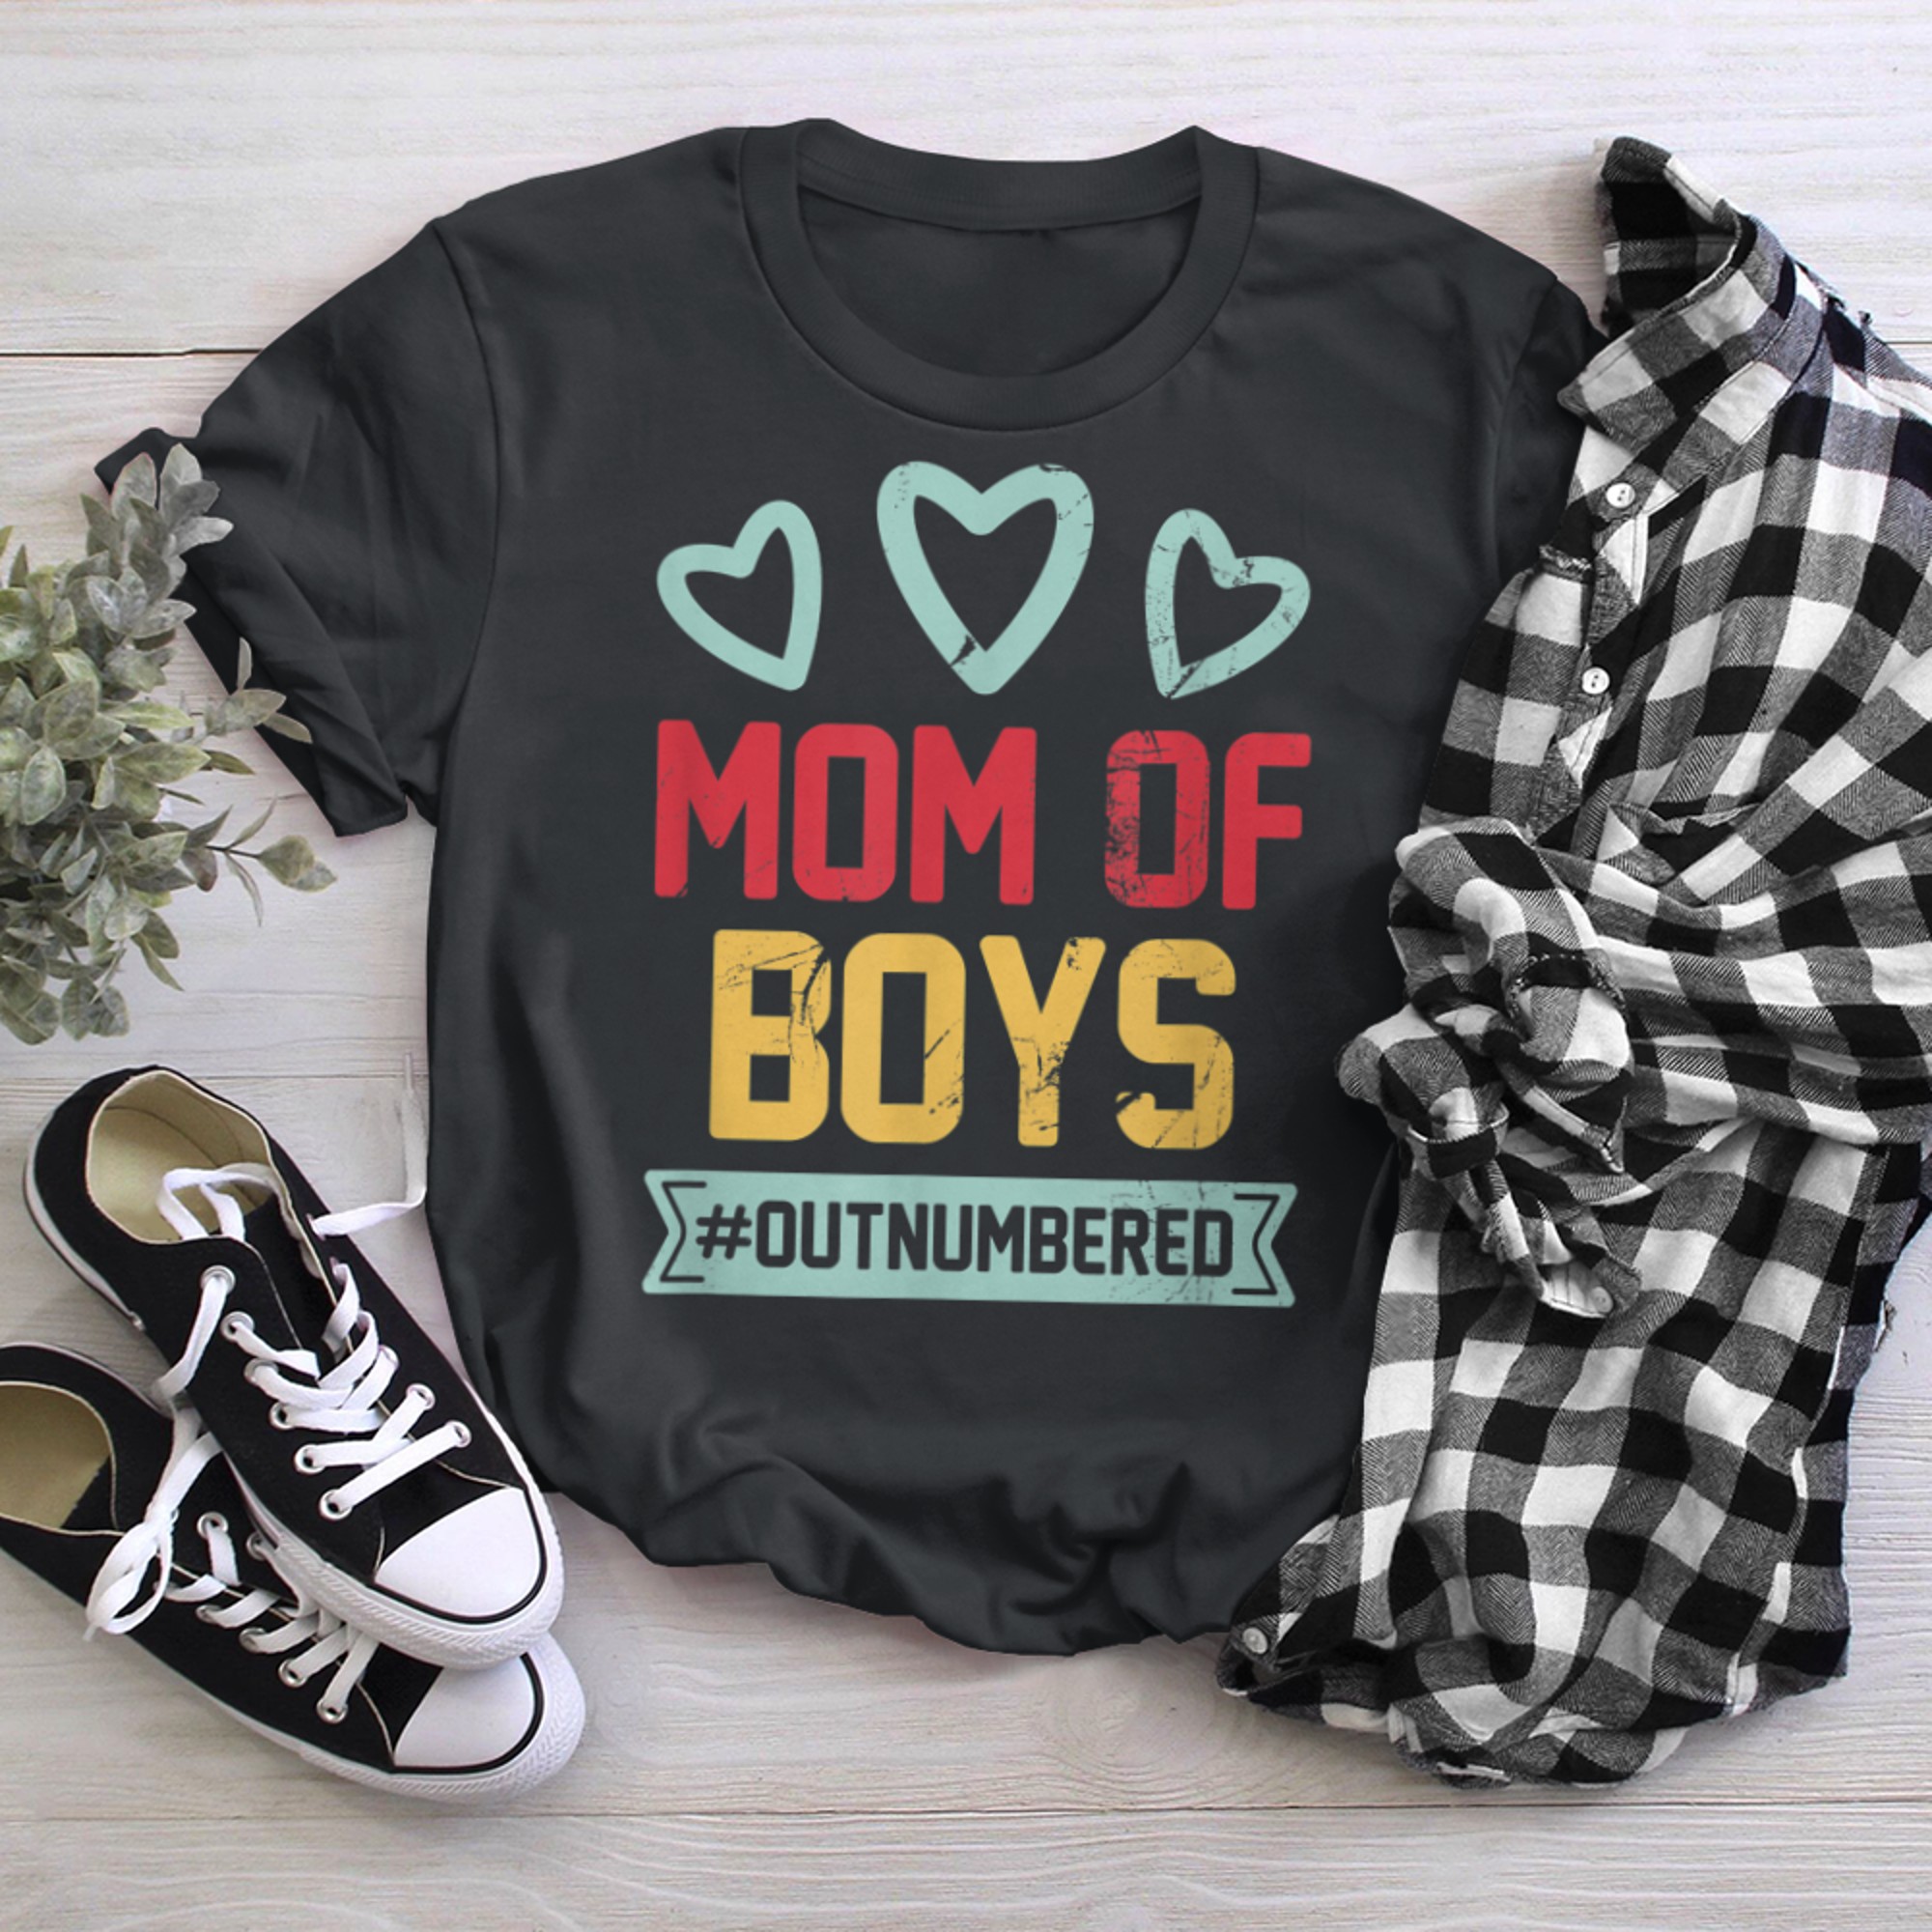 MOM OF #Outnumbered Mom Parents Funny Mothers's Day t-shirt black